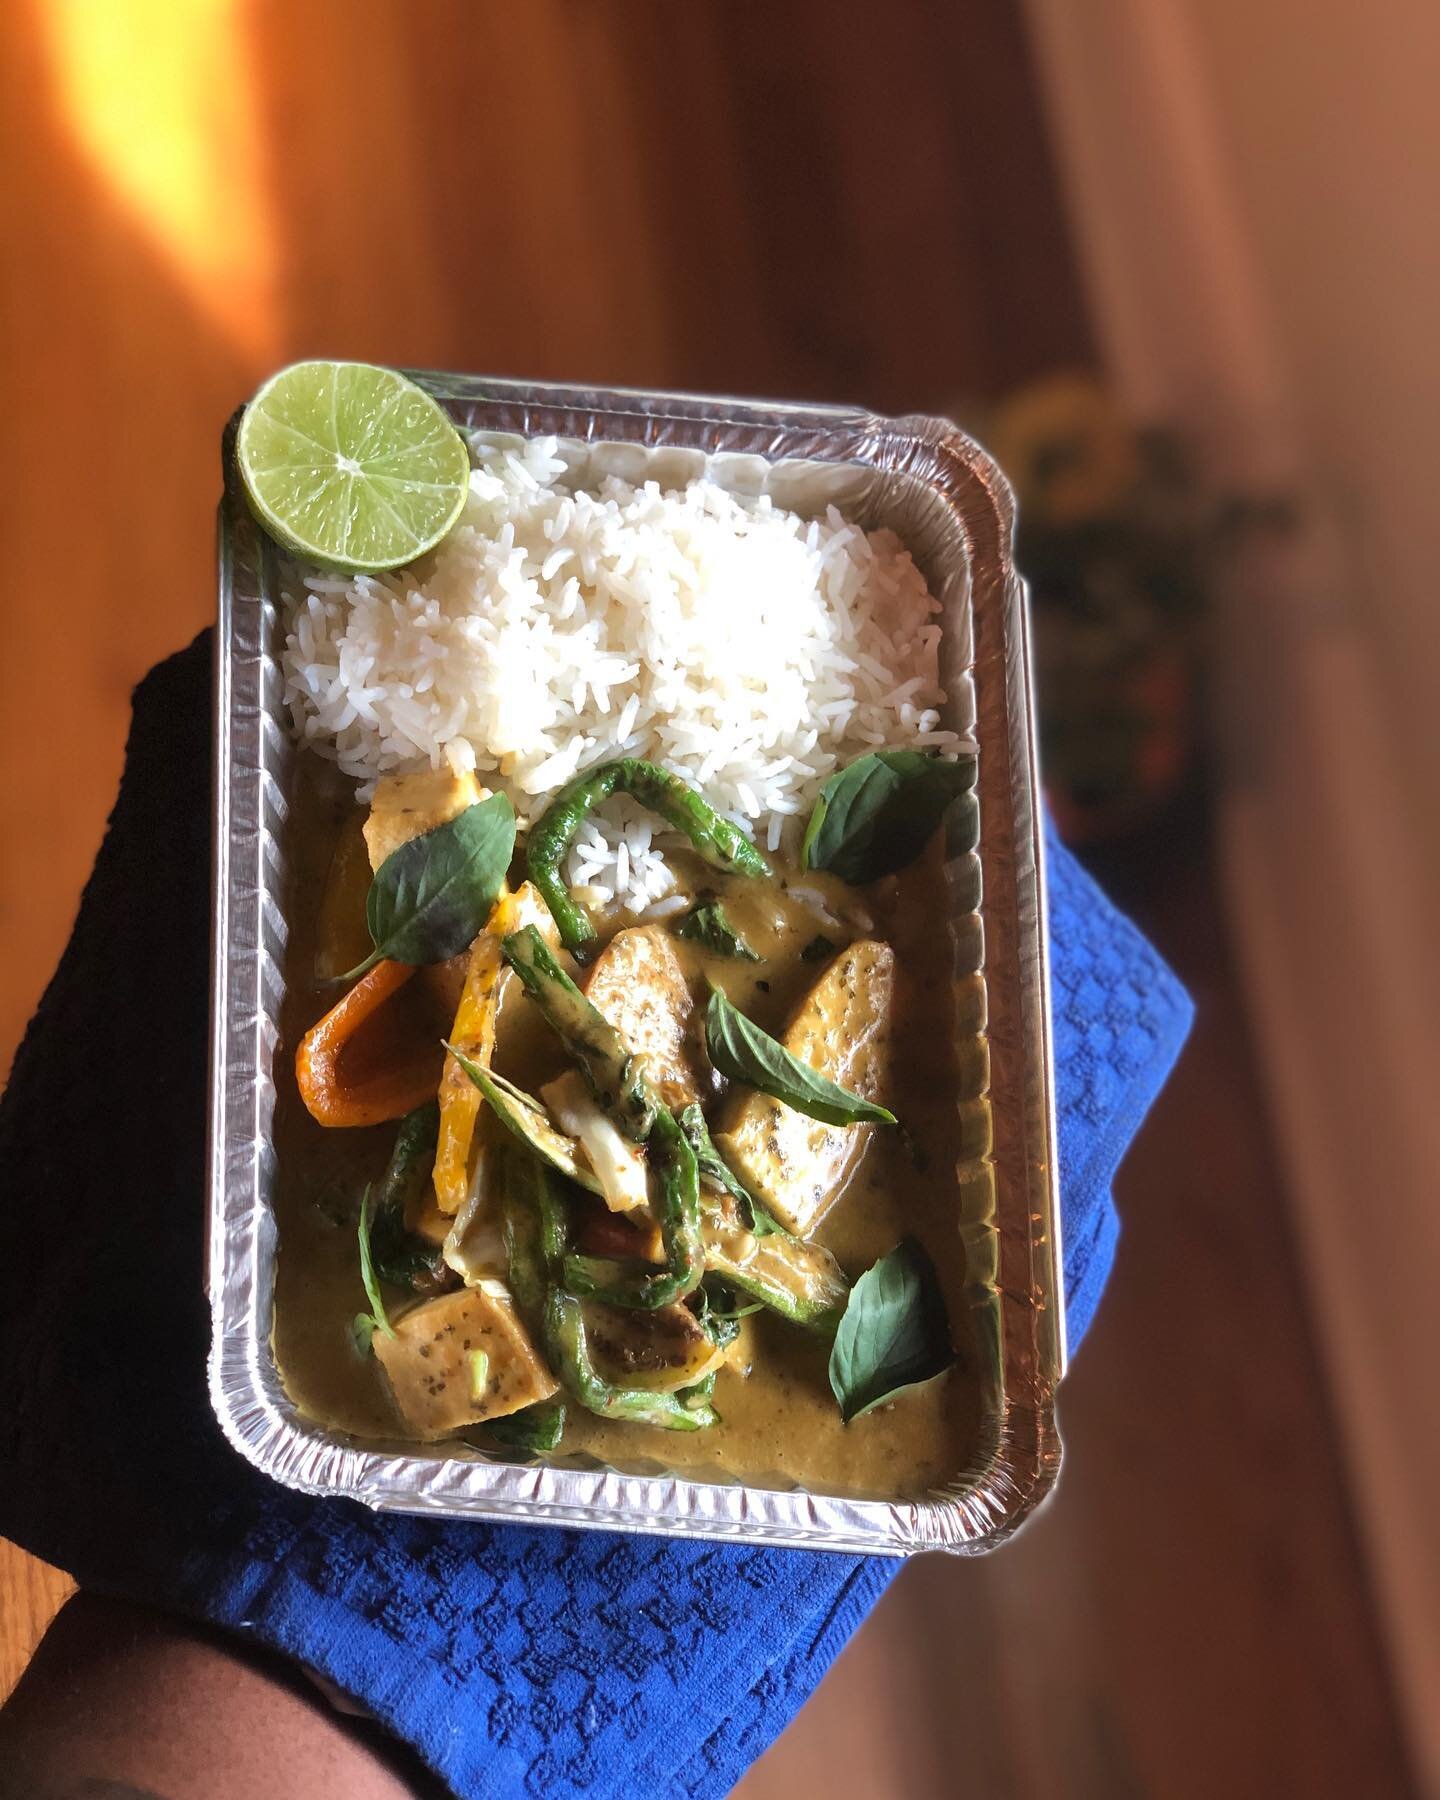 Wednesday 9/9
Thai Green Curry, Roasted Vegetables, Tofu, Jasmine Rice $10 each /with Shrimp $17/with Chicken $14/with Pork $14

📸 Vegetable option shown in pic